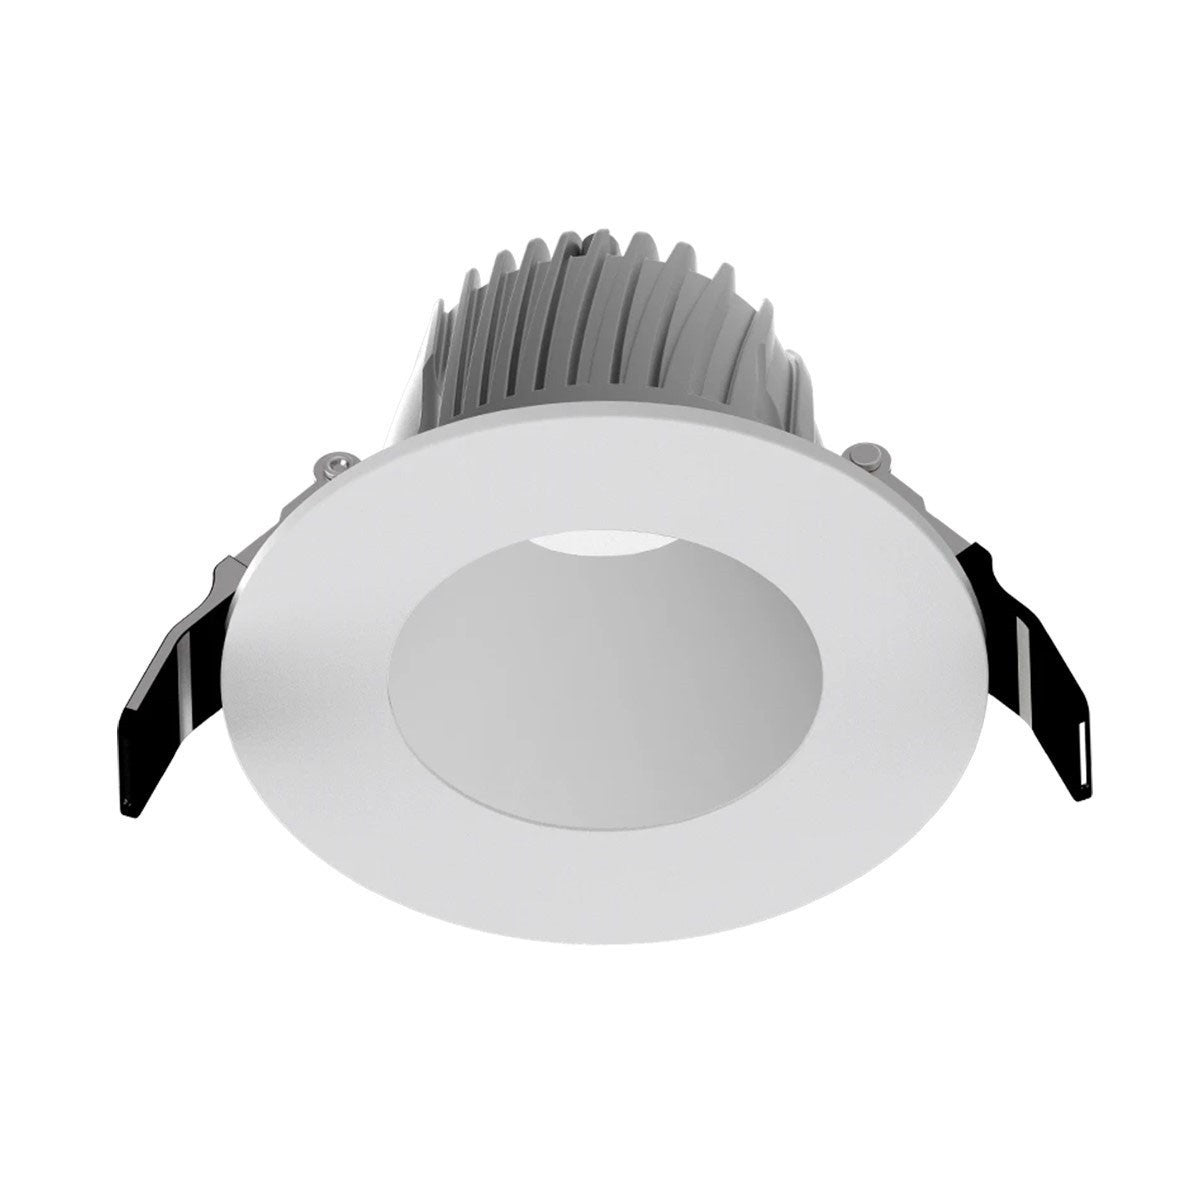 3 Inch LED Deep Regress Commercial Downlight, Field Adjustable 5.5/7.8/8.5W, 380/500/600 Lumens, 30/35/40/50K, Smooth Trim, Matte Silver Finish